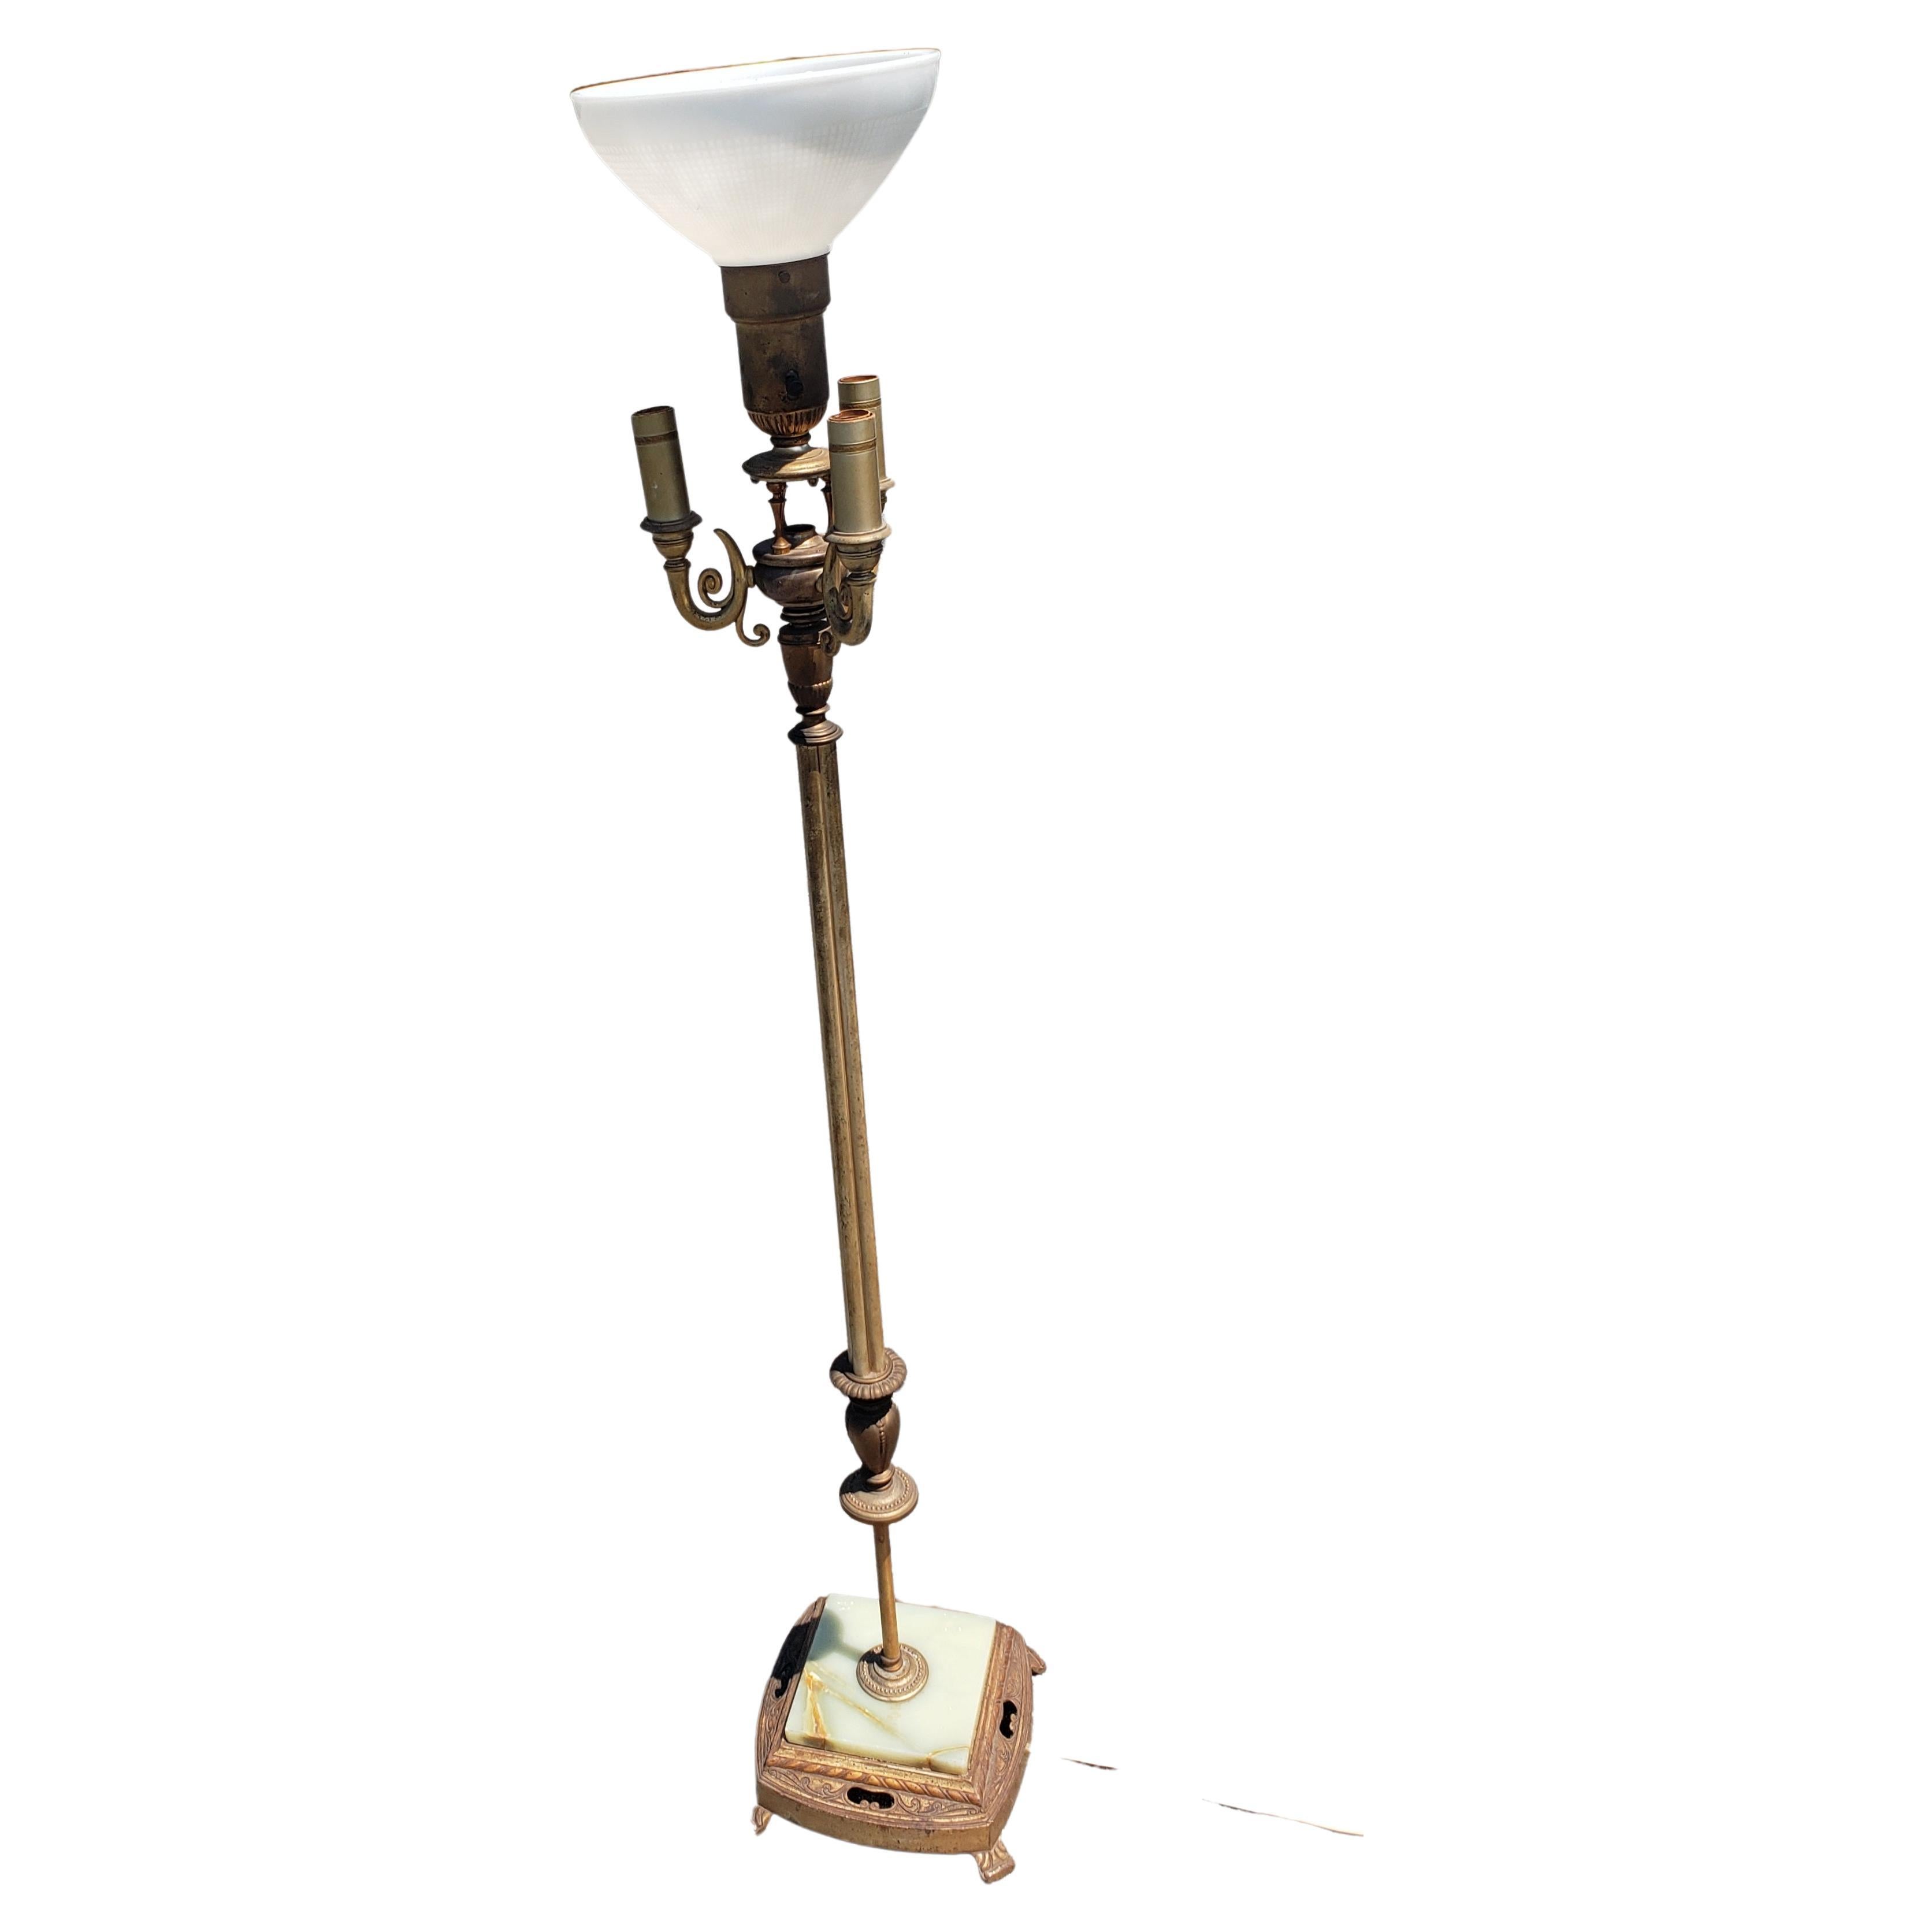 Late Victorian Patinated Metal and Onyx Torchiere 4-Light Floor Lamp In Good Condition For Sale In Germantown, MD